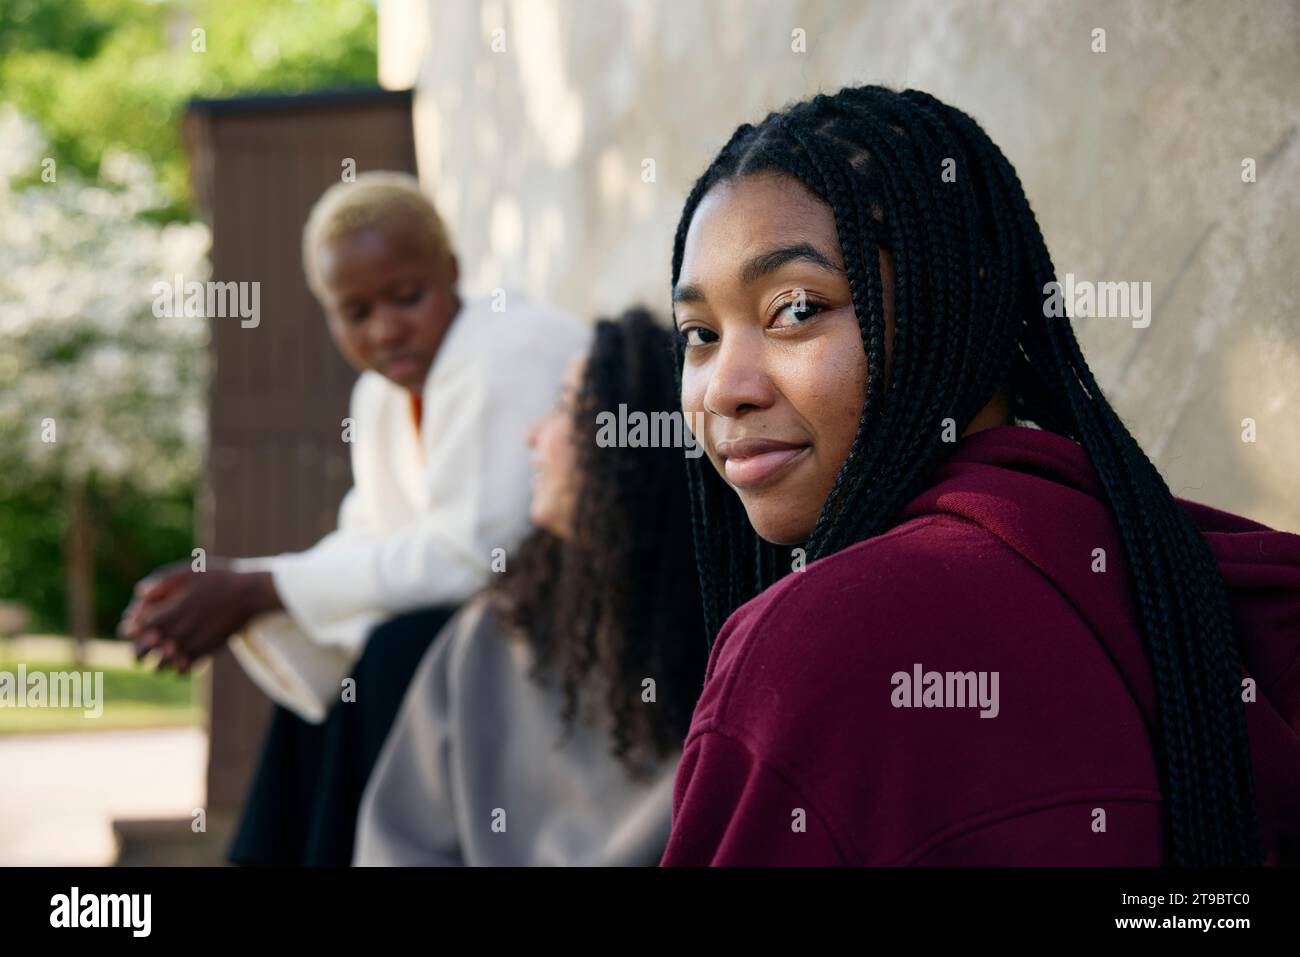 Portrait of woman with braided hair sitting near friends Stock Photo